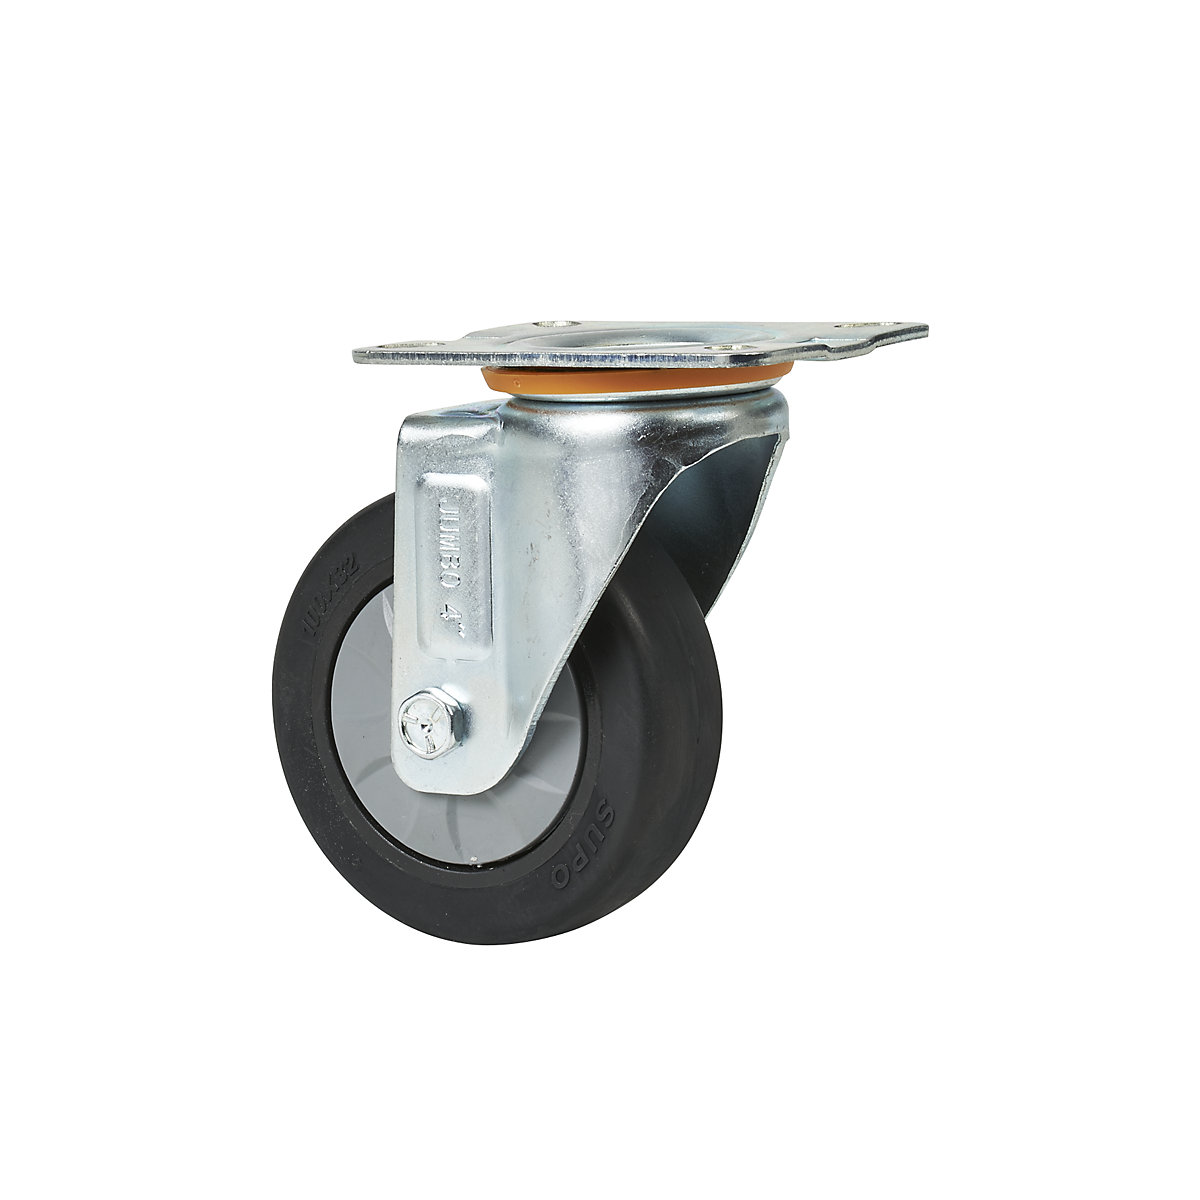 Spare wheel for table trolley